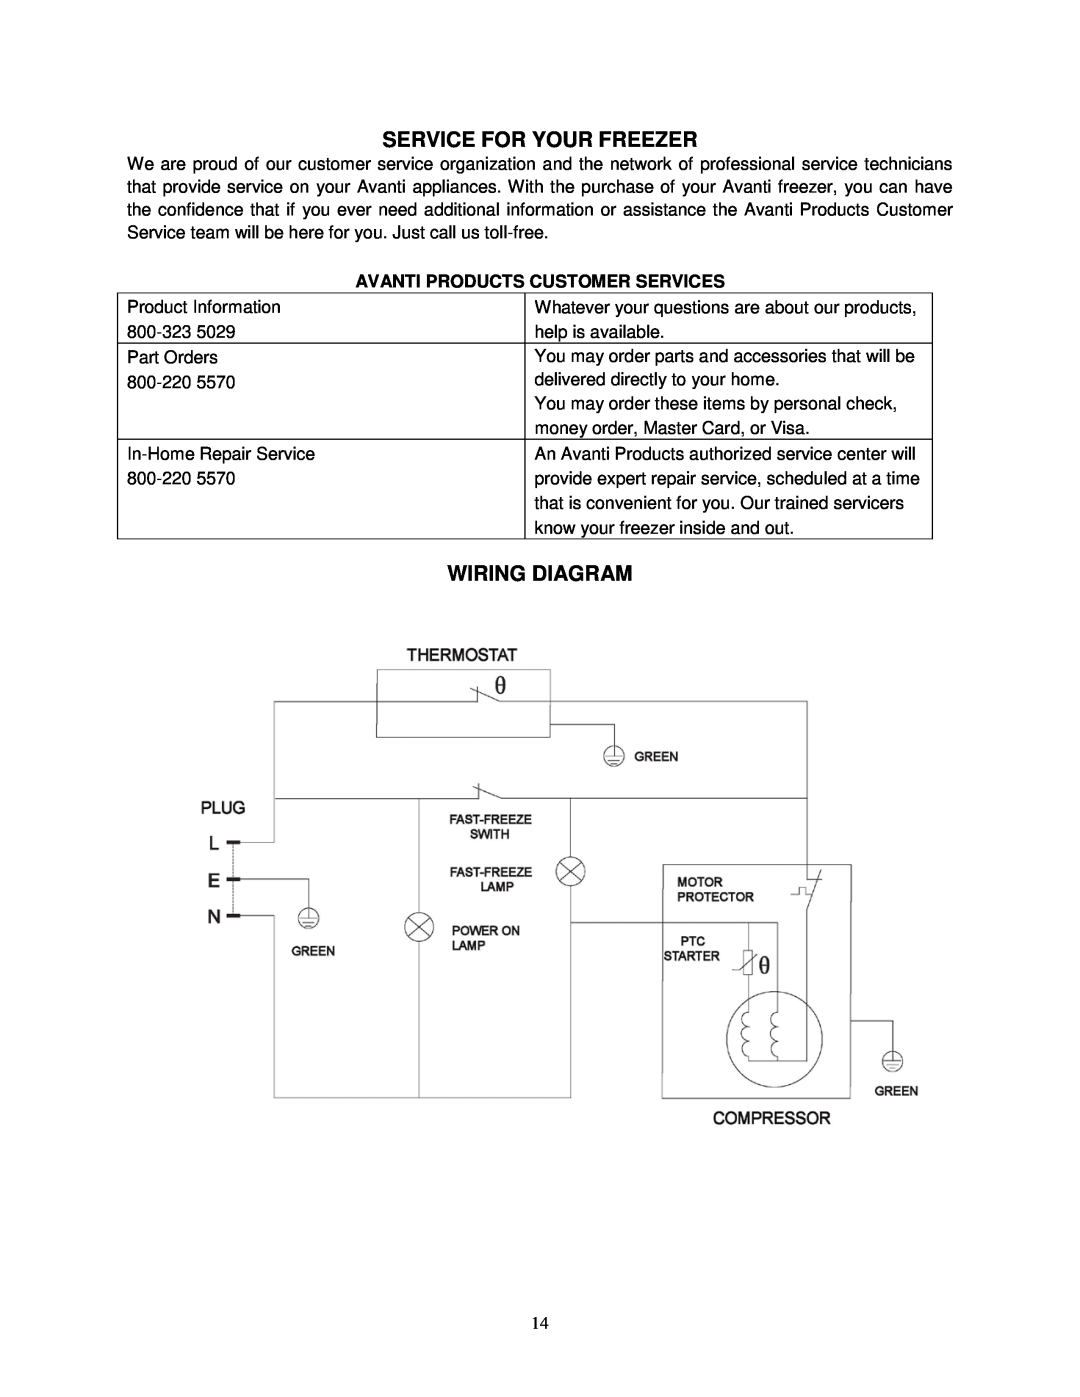 Avanti CF208G instruction manual Service For Your Freezer, Wiring Diagram, Avanti Products Customer Services 